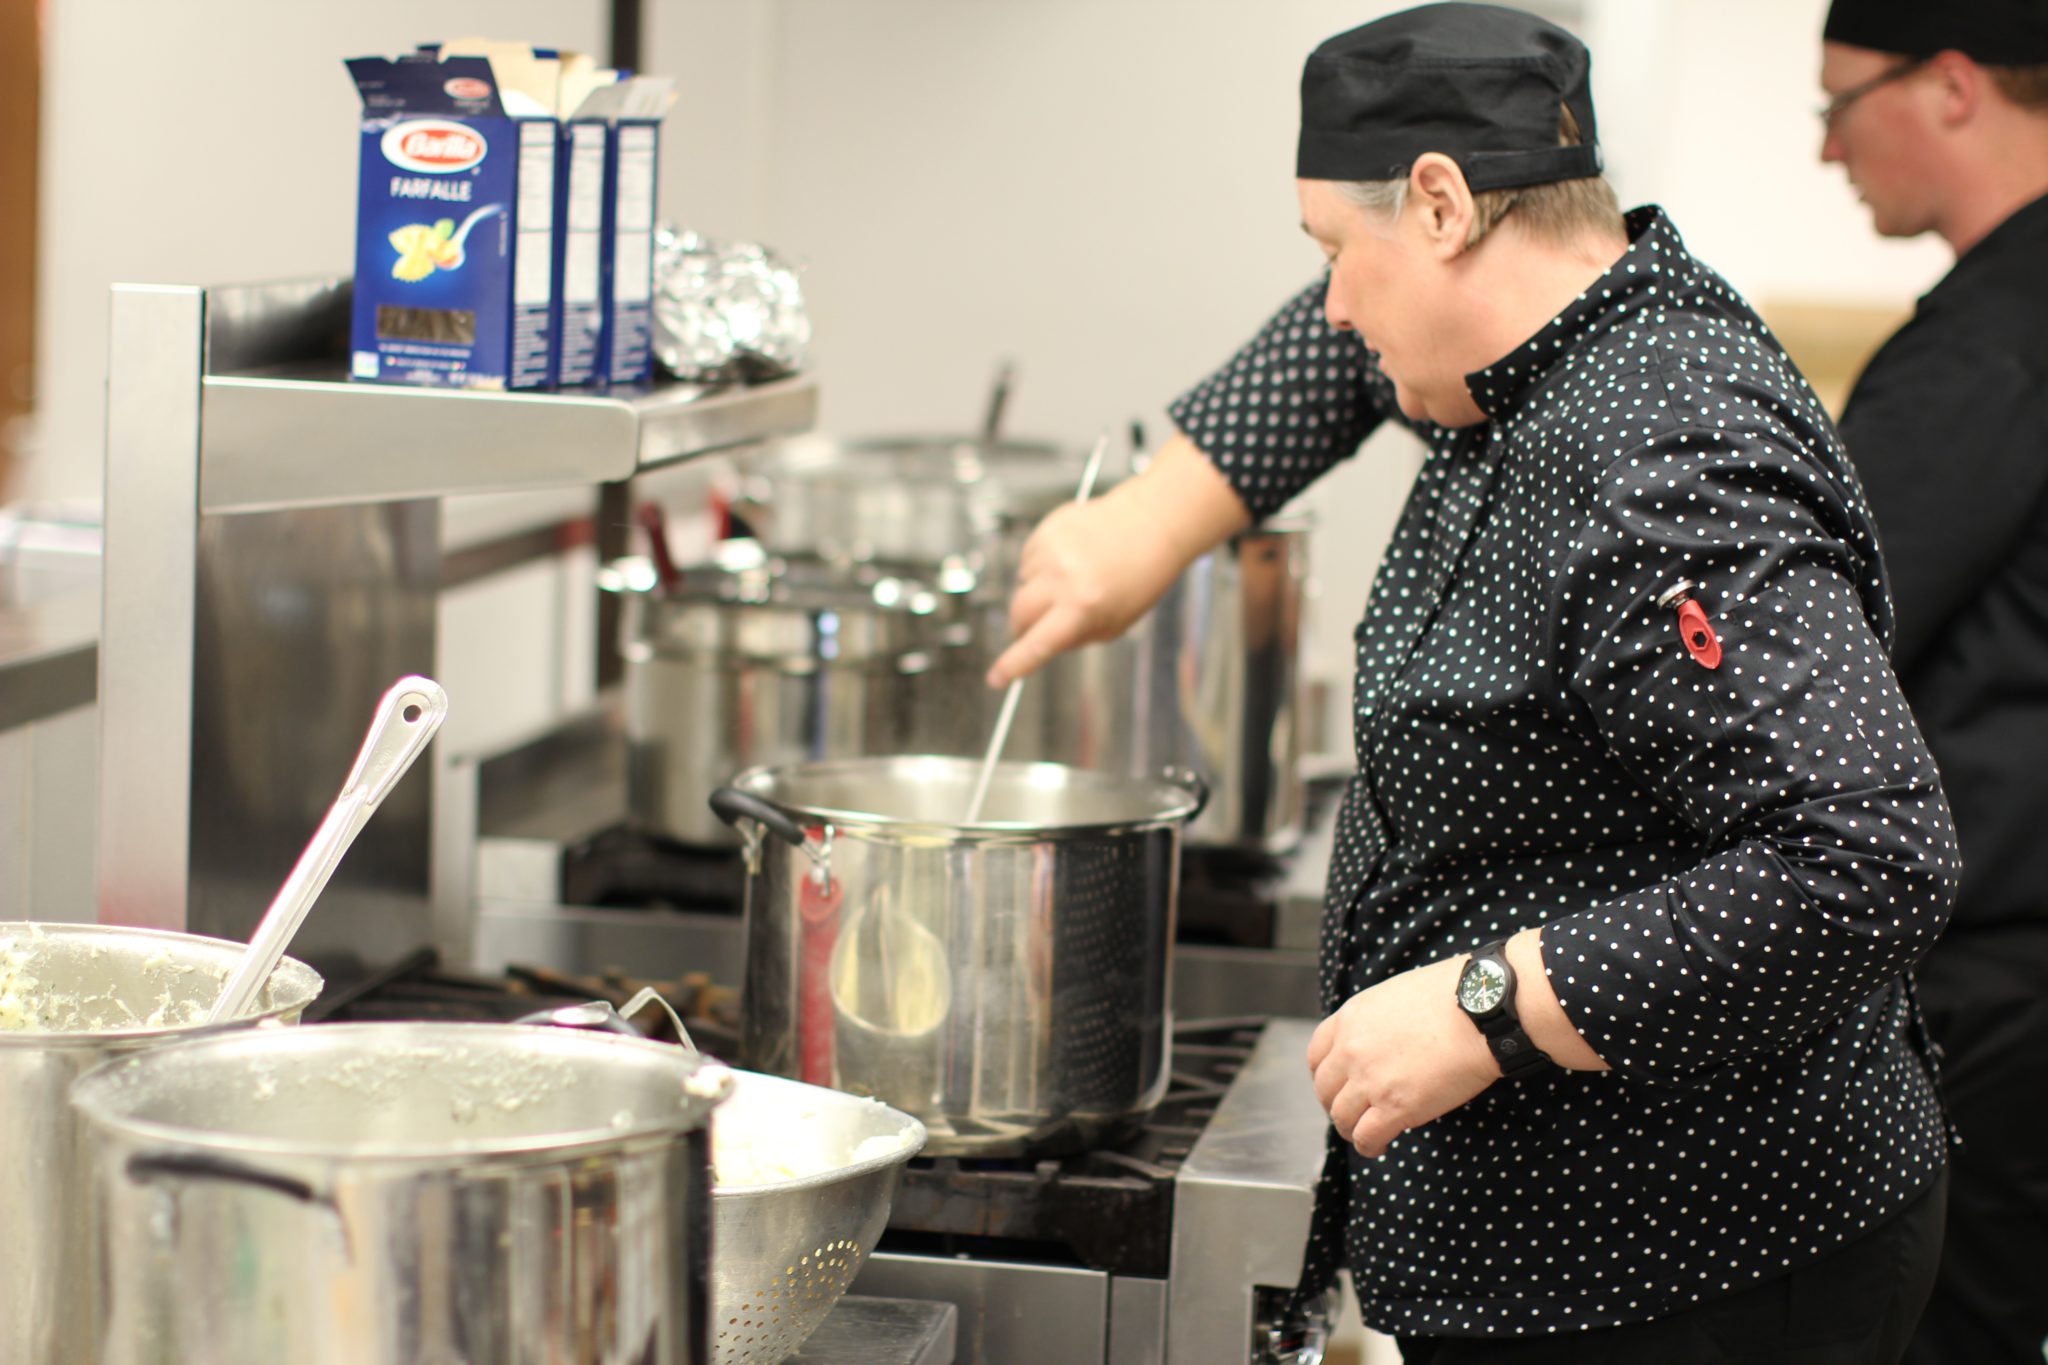 Escoffier student Kristen Douglas preparing food for her catering company, The Main Event.